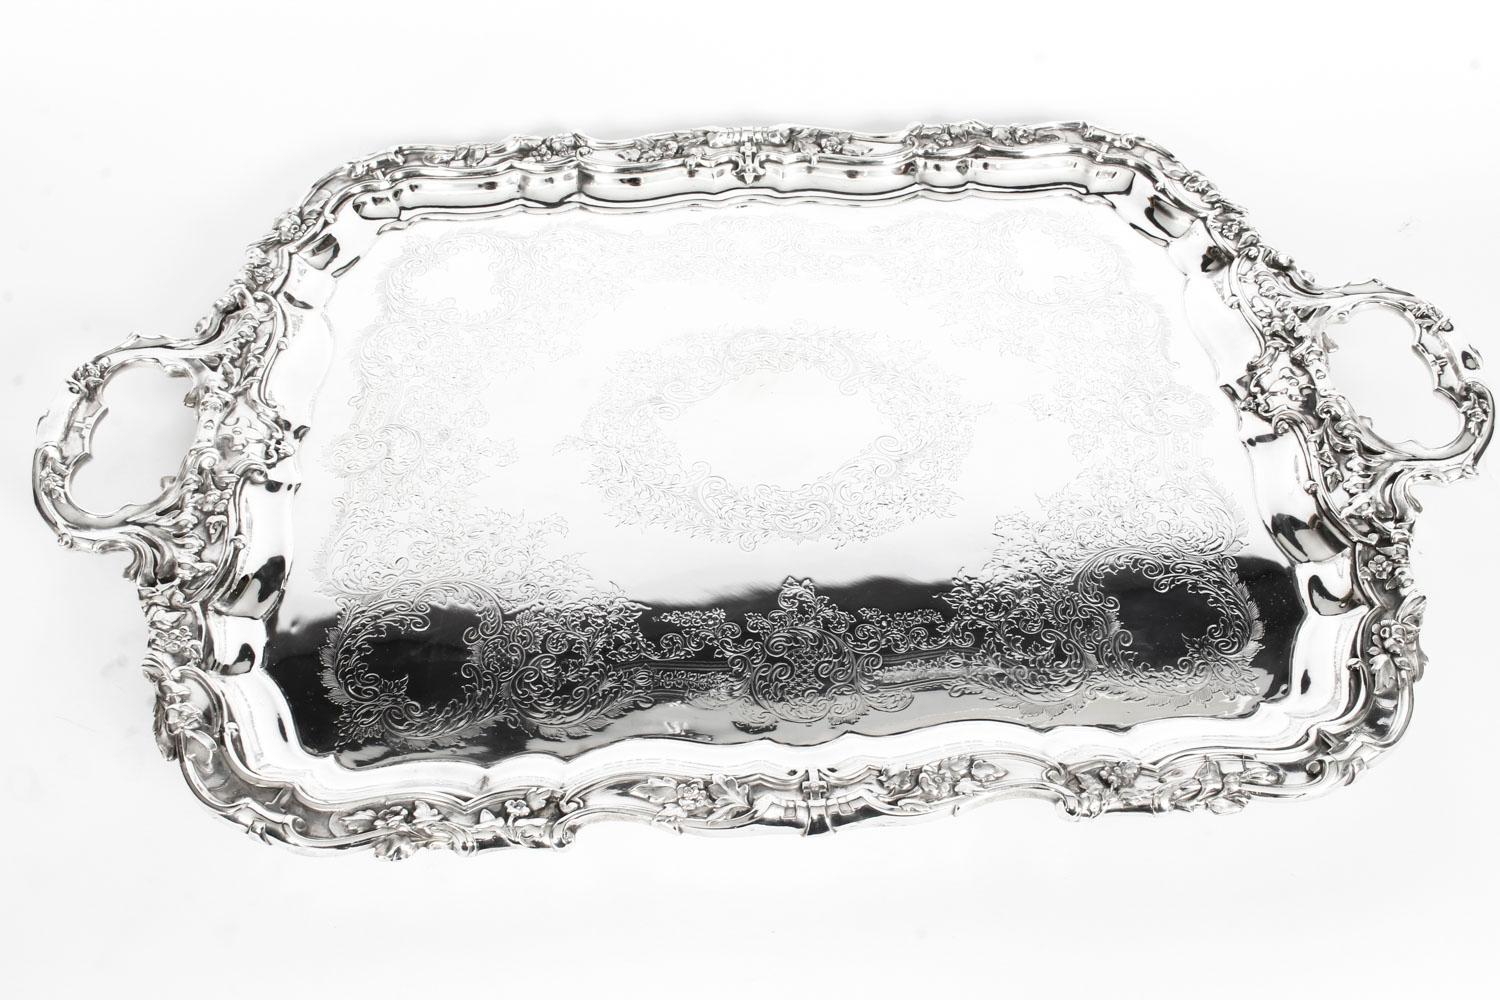 This is an exceptional large neoclassical antique English Victorian silver plated service tray by the renowned silversmith Walker & Hall Sheffield, circa 1870 in date.

The rectangular tray features elegantly engraved foliage decoration to the